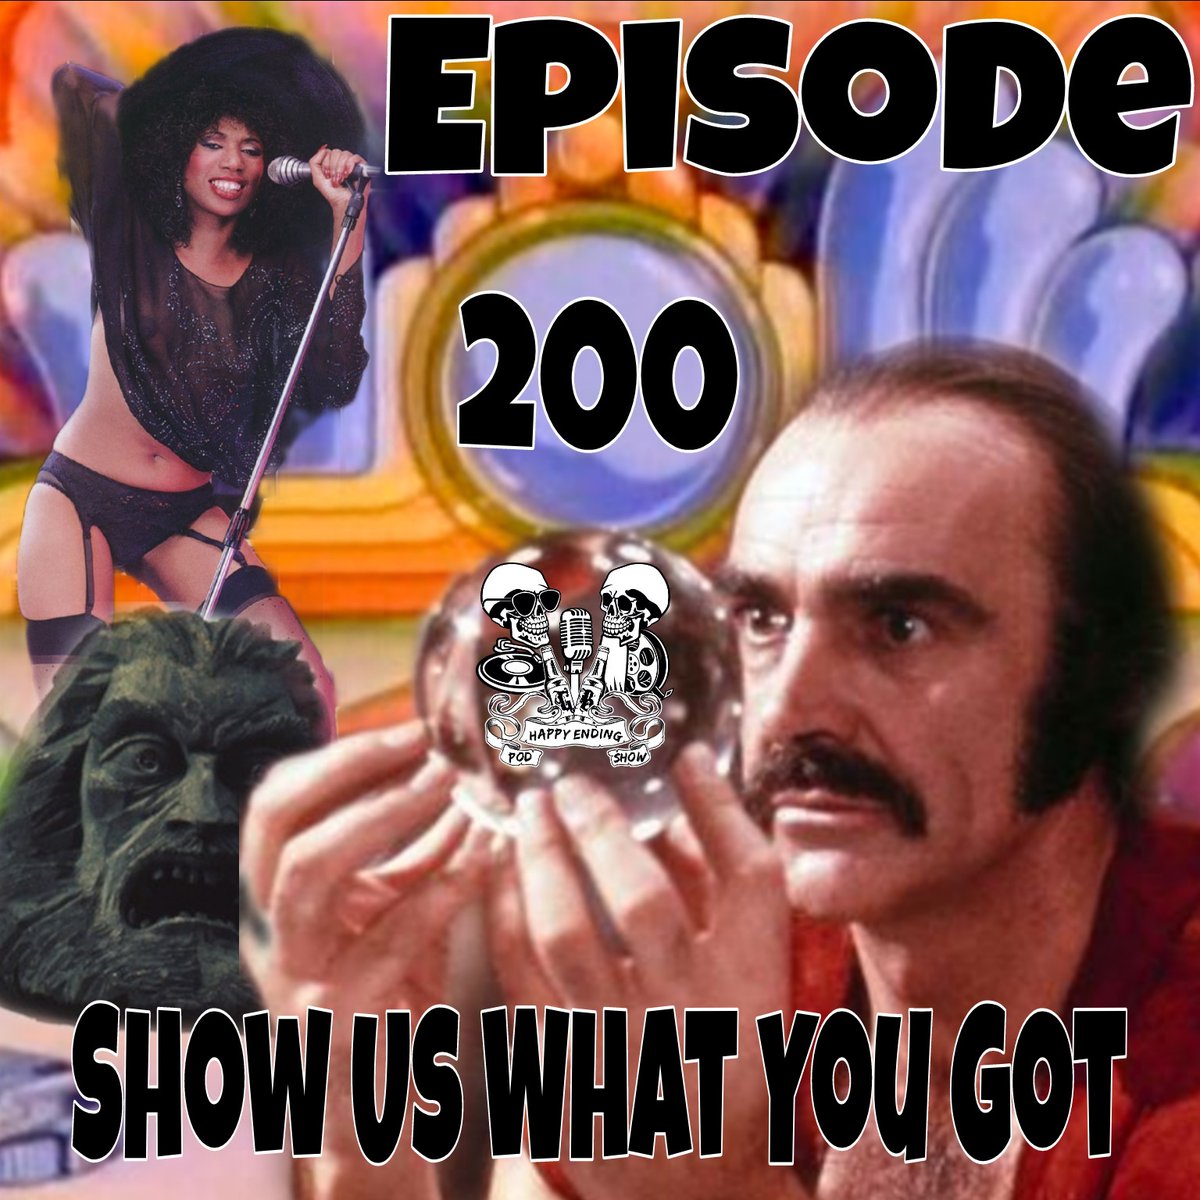 Episode 200! Show Us What You Got!! by Happy Ending Pod Show on #PodcastAndChill #DrinksIncluded 💯+💯
on.soundcloud.com/NE1sj